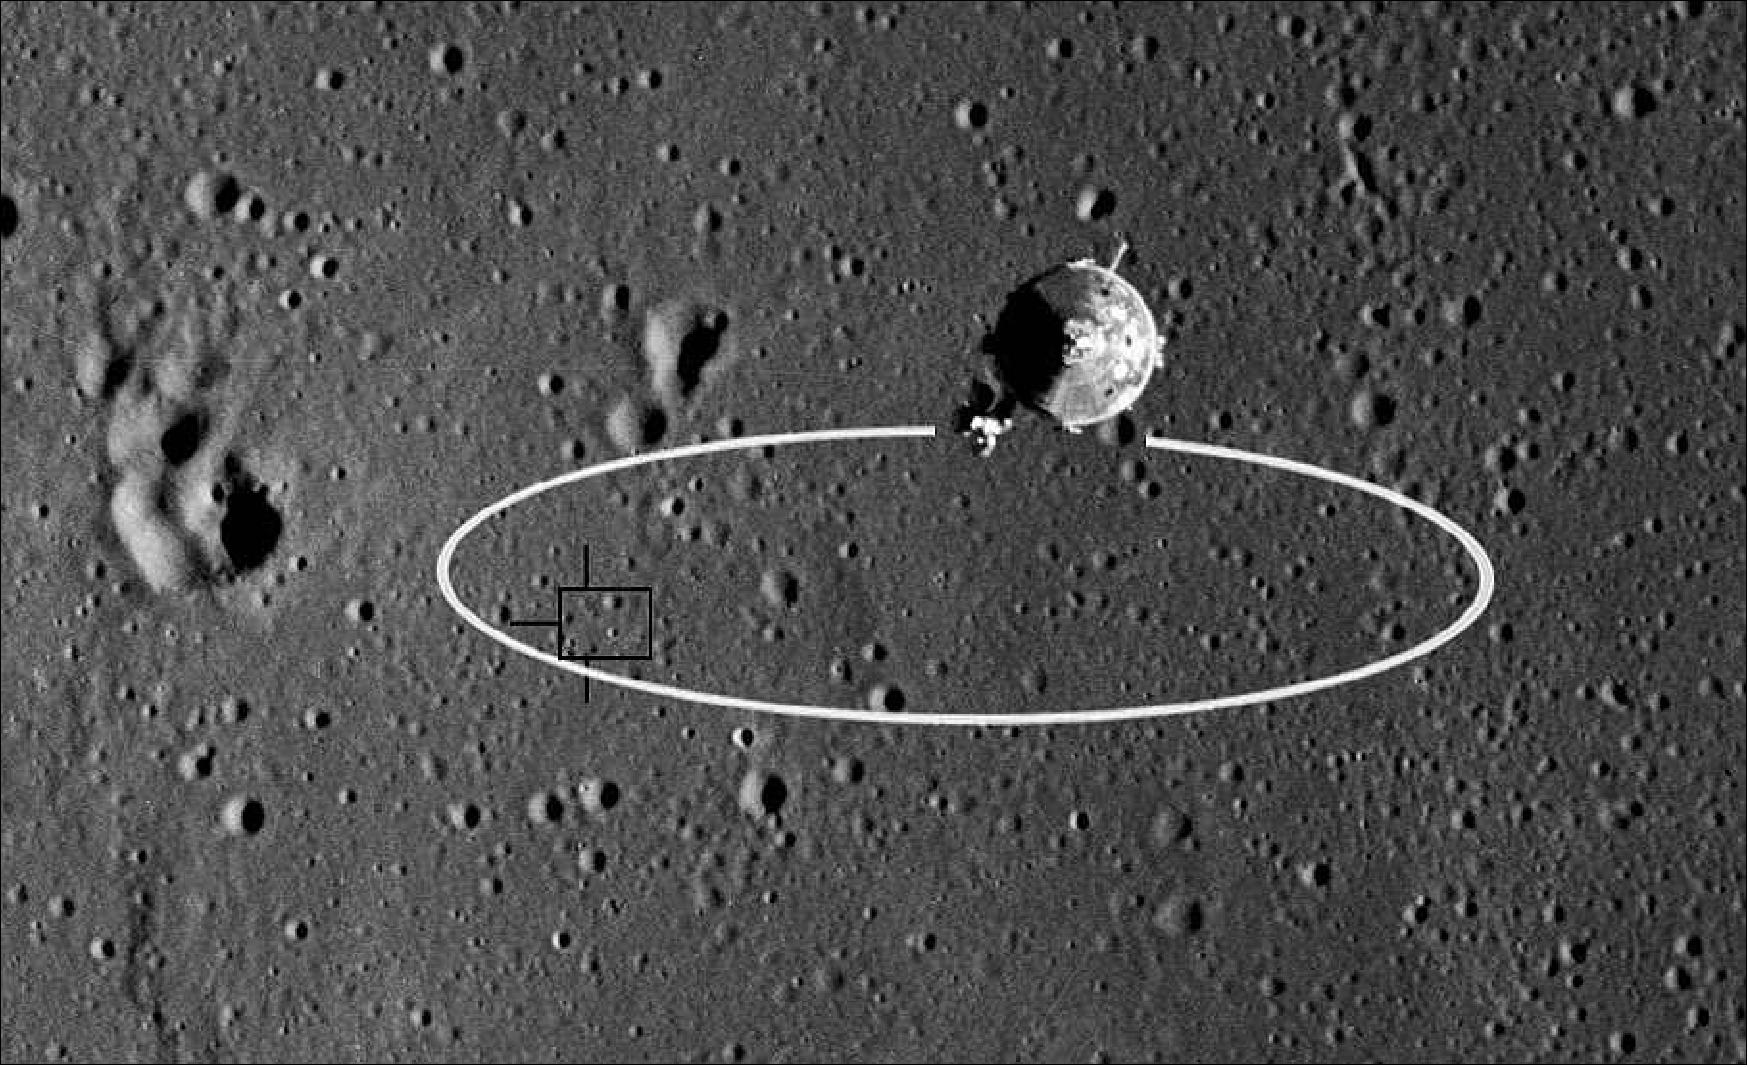 Figure 8: The Apollo 11 landing ellipse, shown here, was 11 miles by 3 miles. Precision landing technology will reduce landing area drastically, allowing for multiple missions to land in the same region (image credit: NASA)